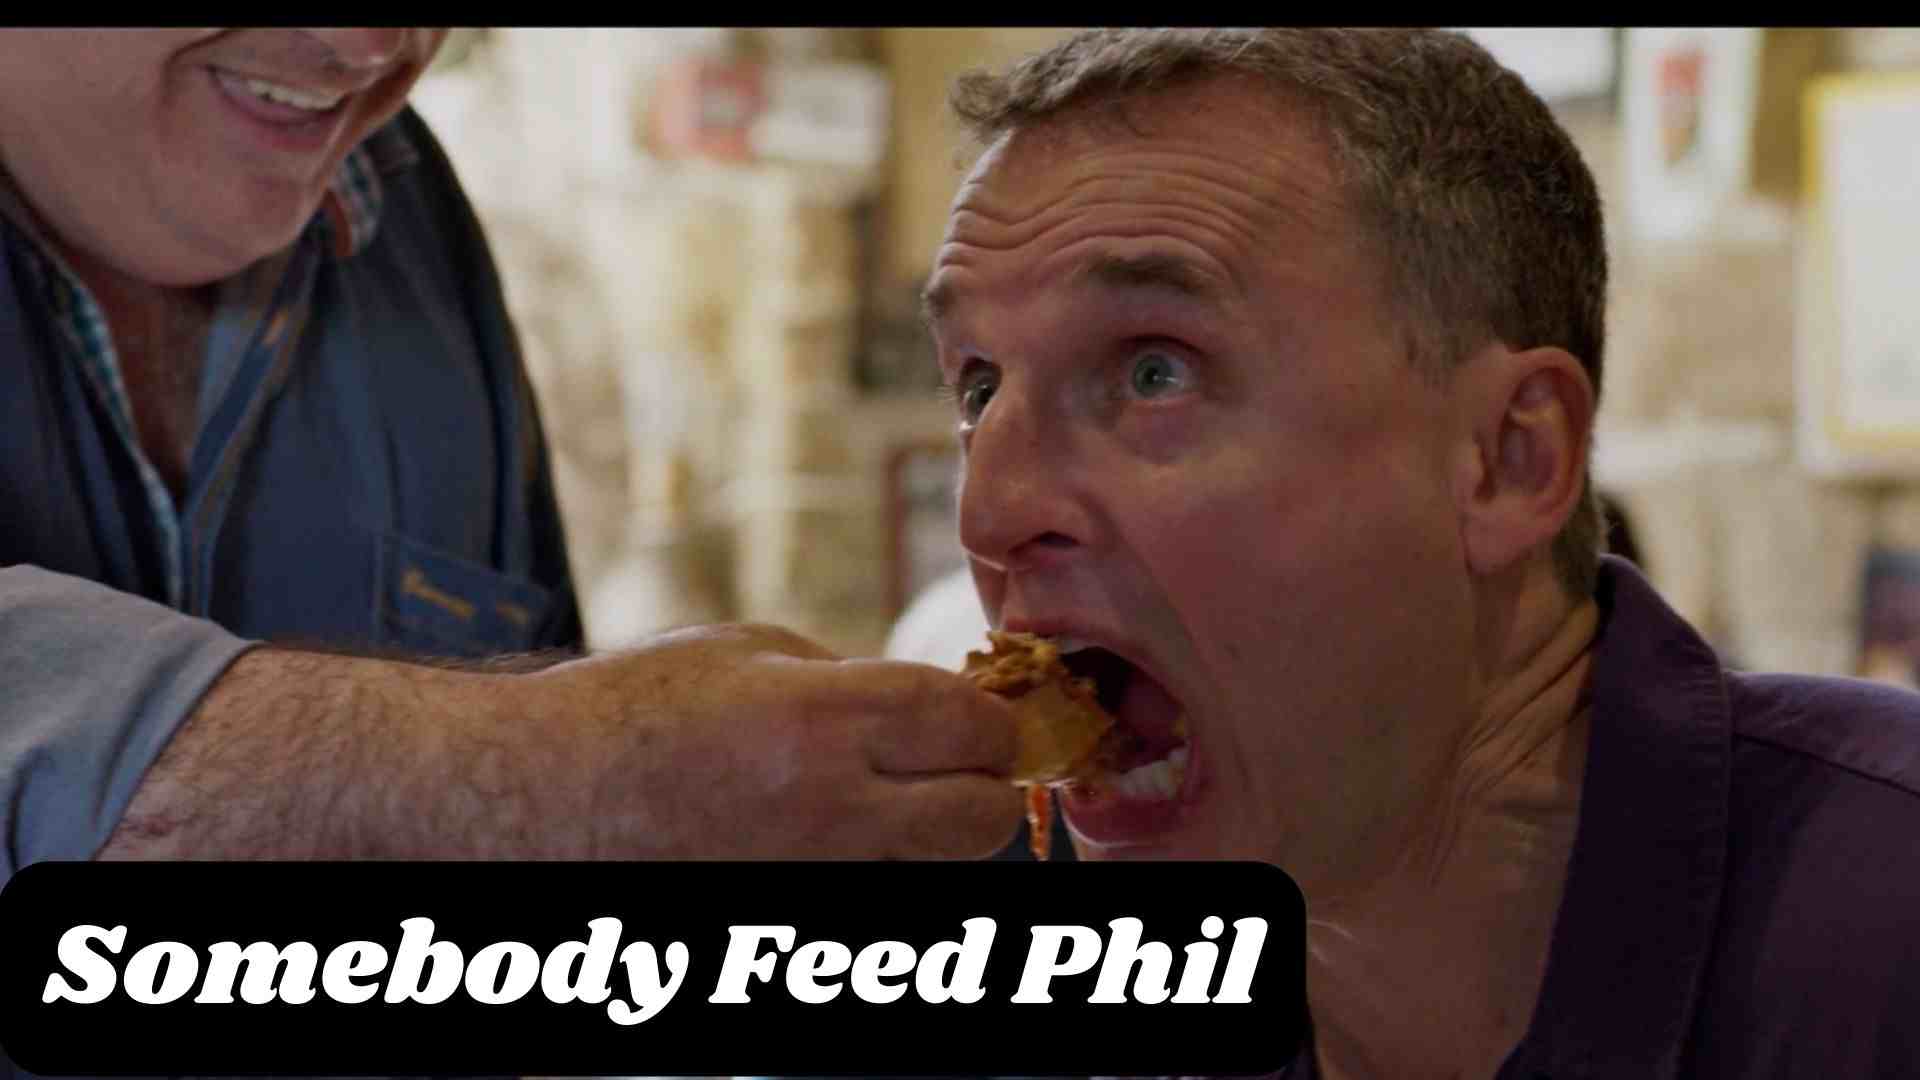 Somebody Feed Phil Parents guide and Age Rating | 2022